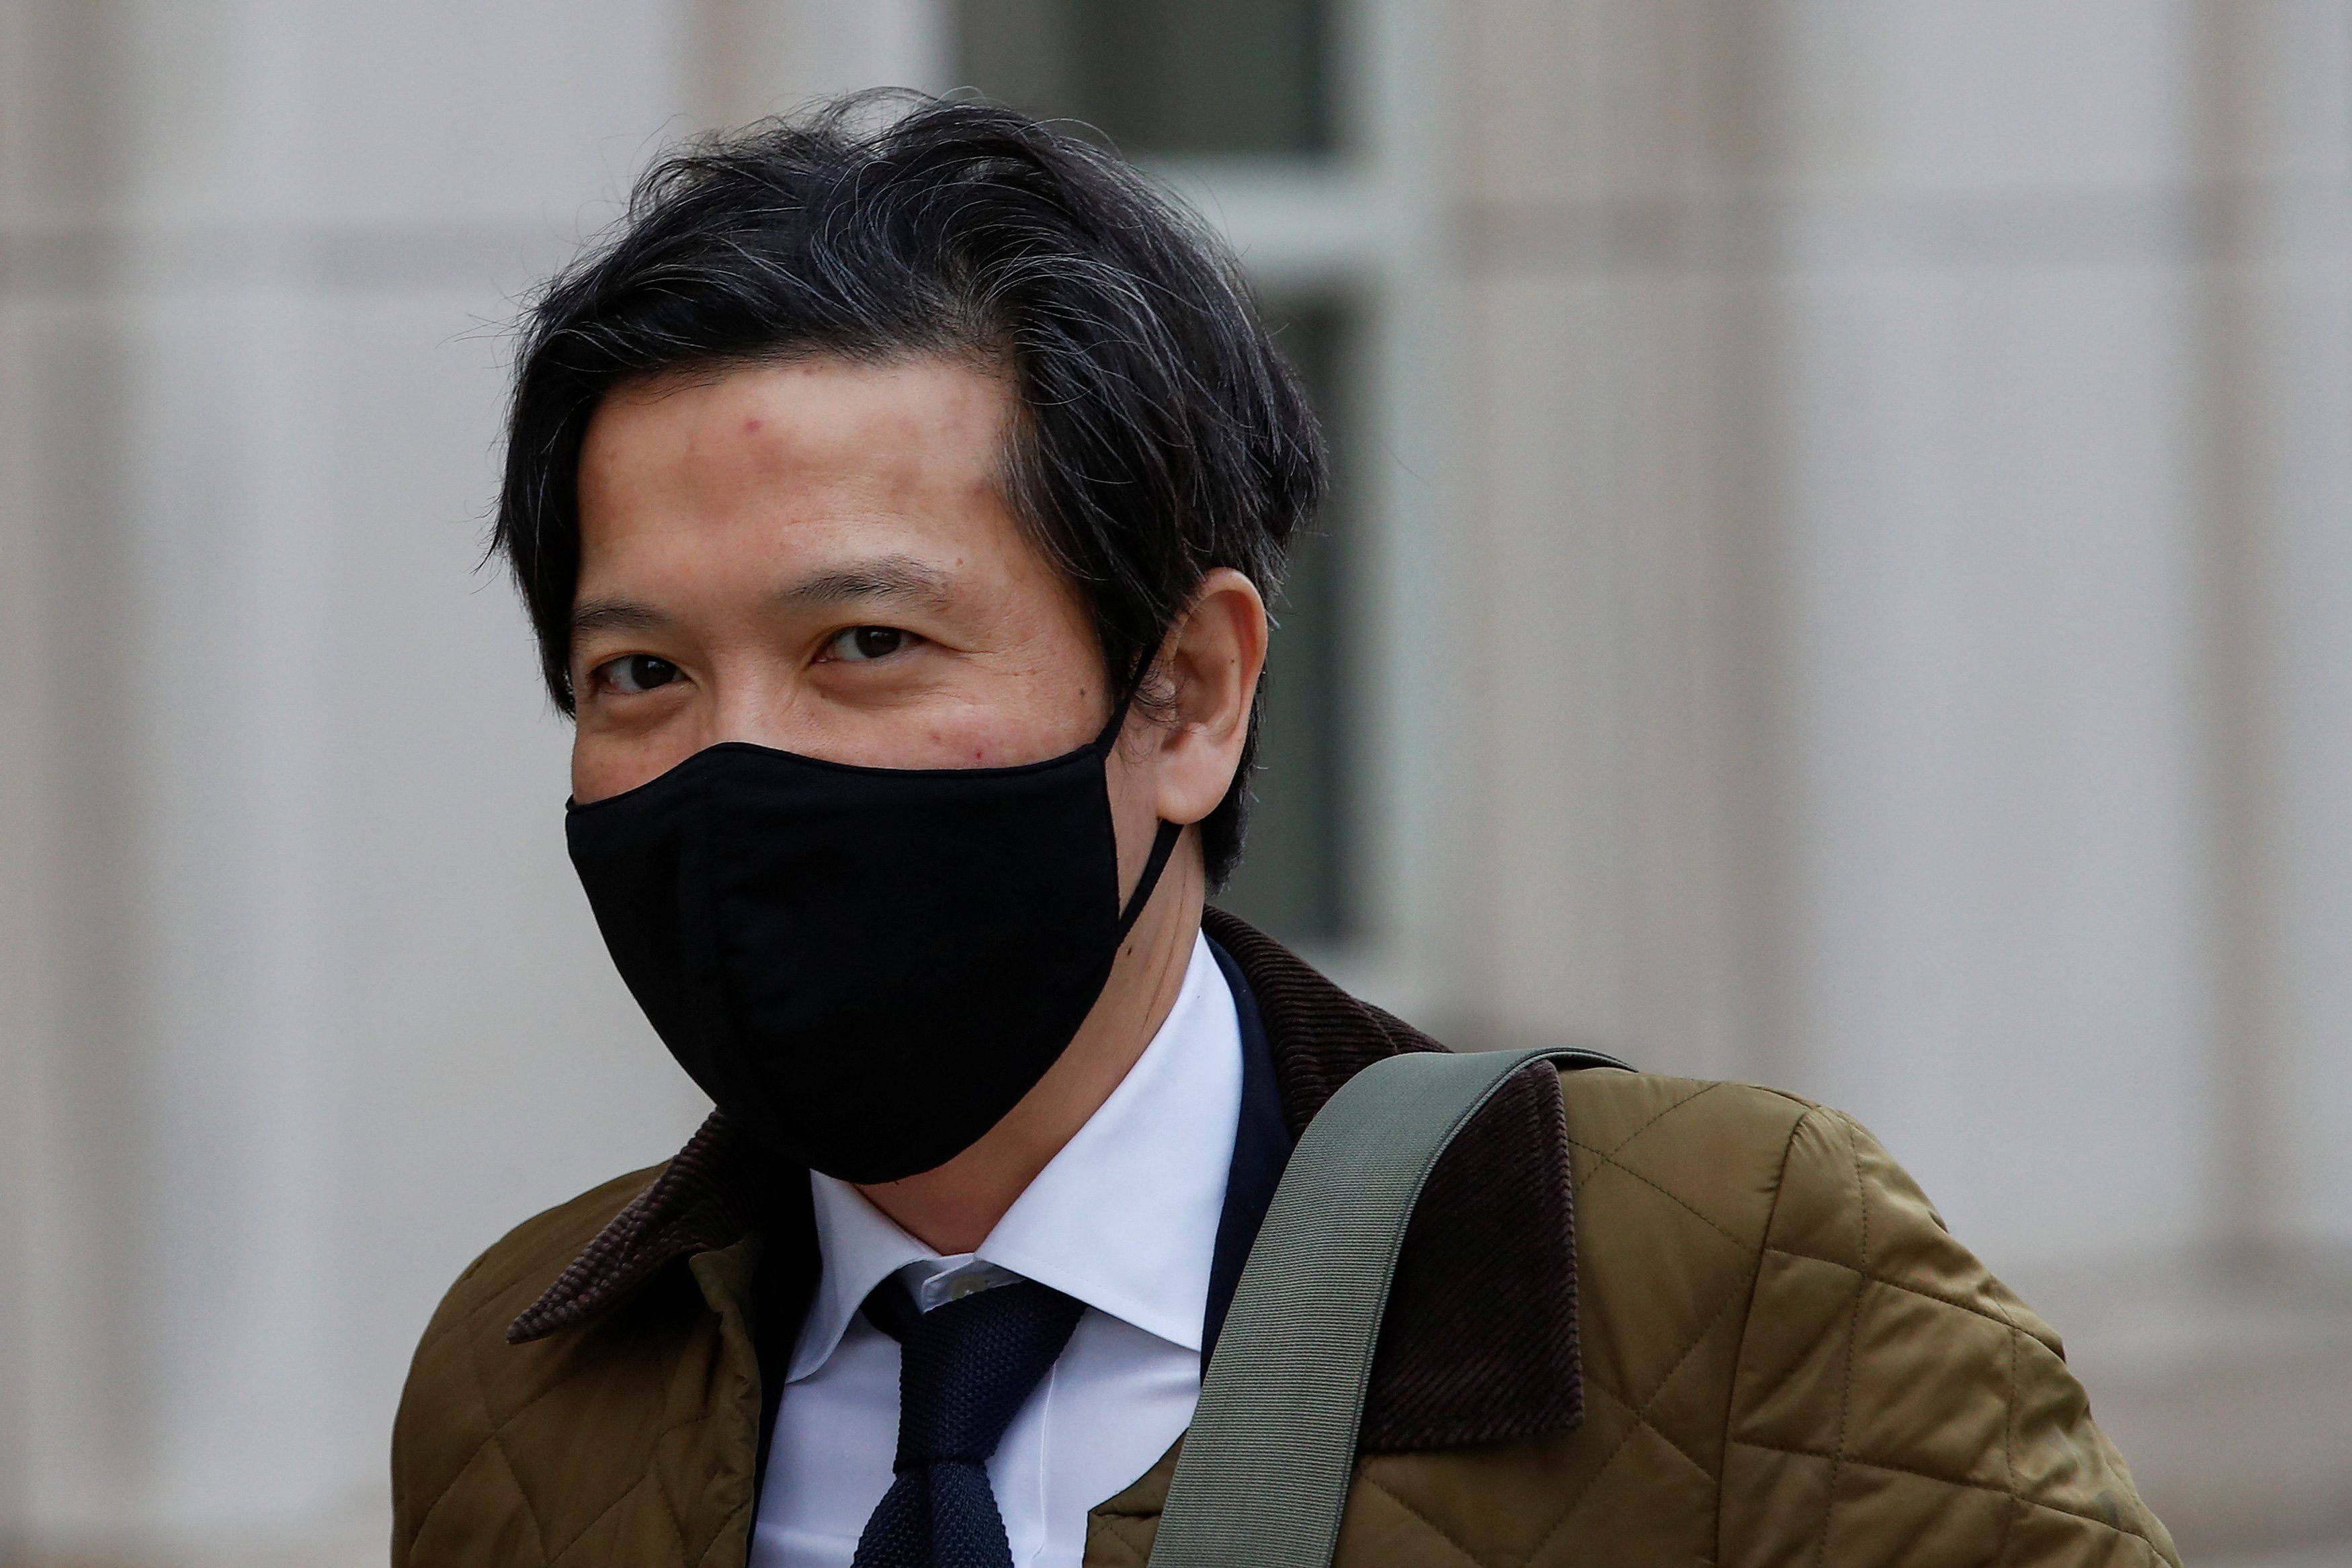 Ex-Goldman Sachs banker Roger Ng arrives for his criminal trial in New York in February 2022. Photo: Reuters